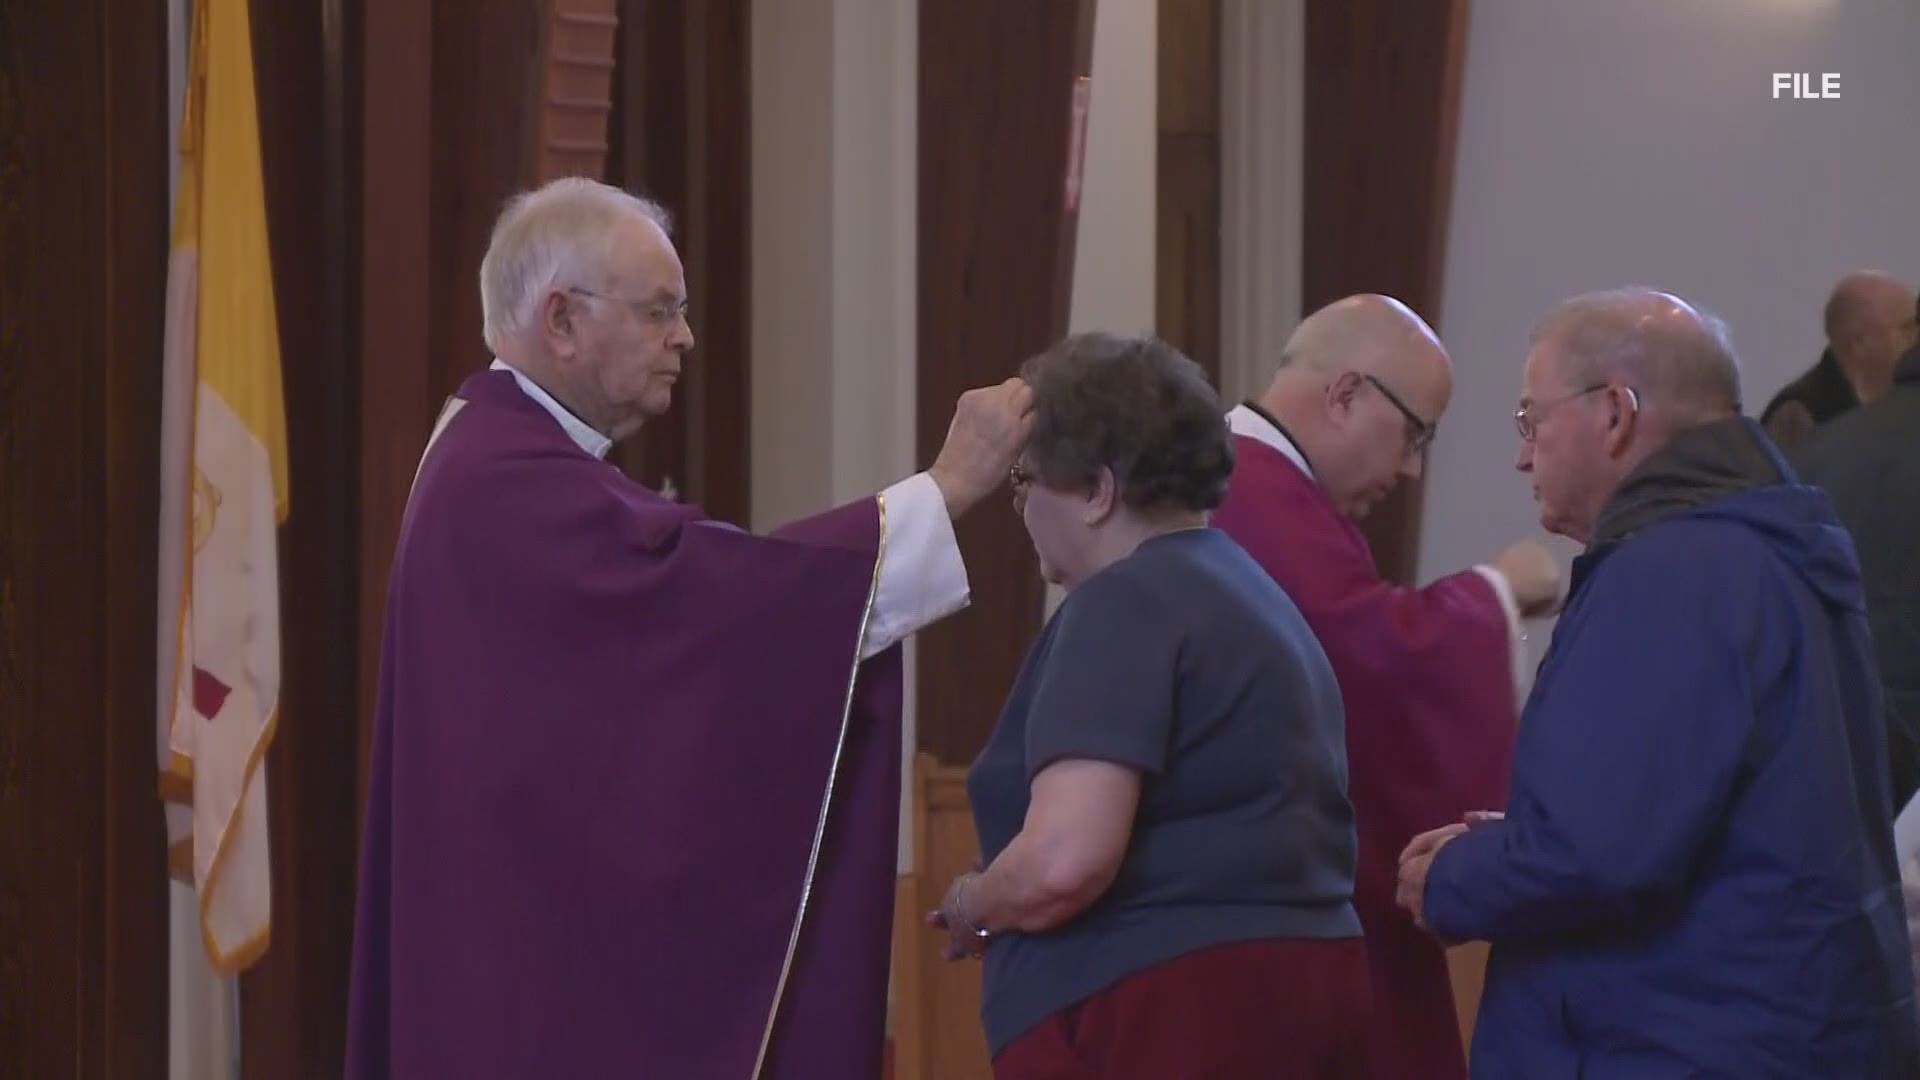 Many churches in Maine figured out some pandemic-friendly protocols to keep Ash Wednesday going this year, from reduced capacity in churches to live streams.